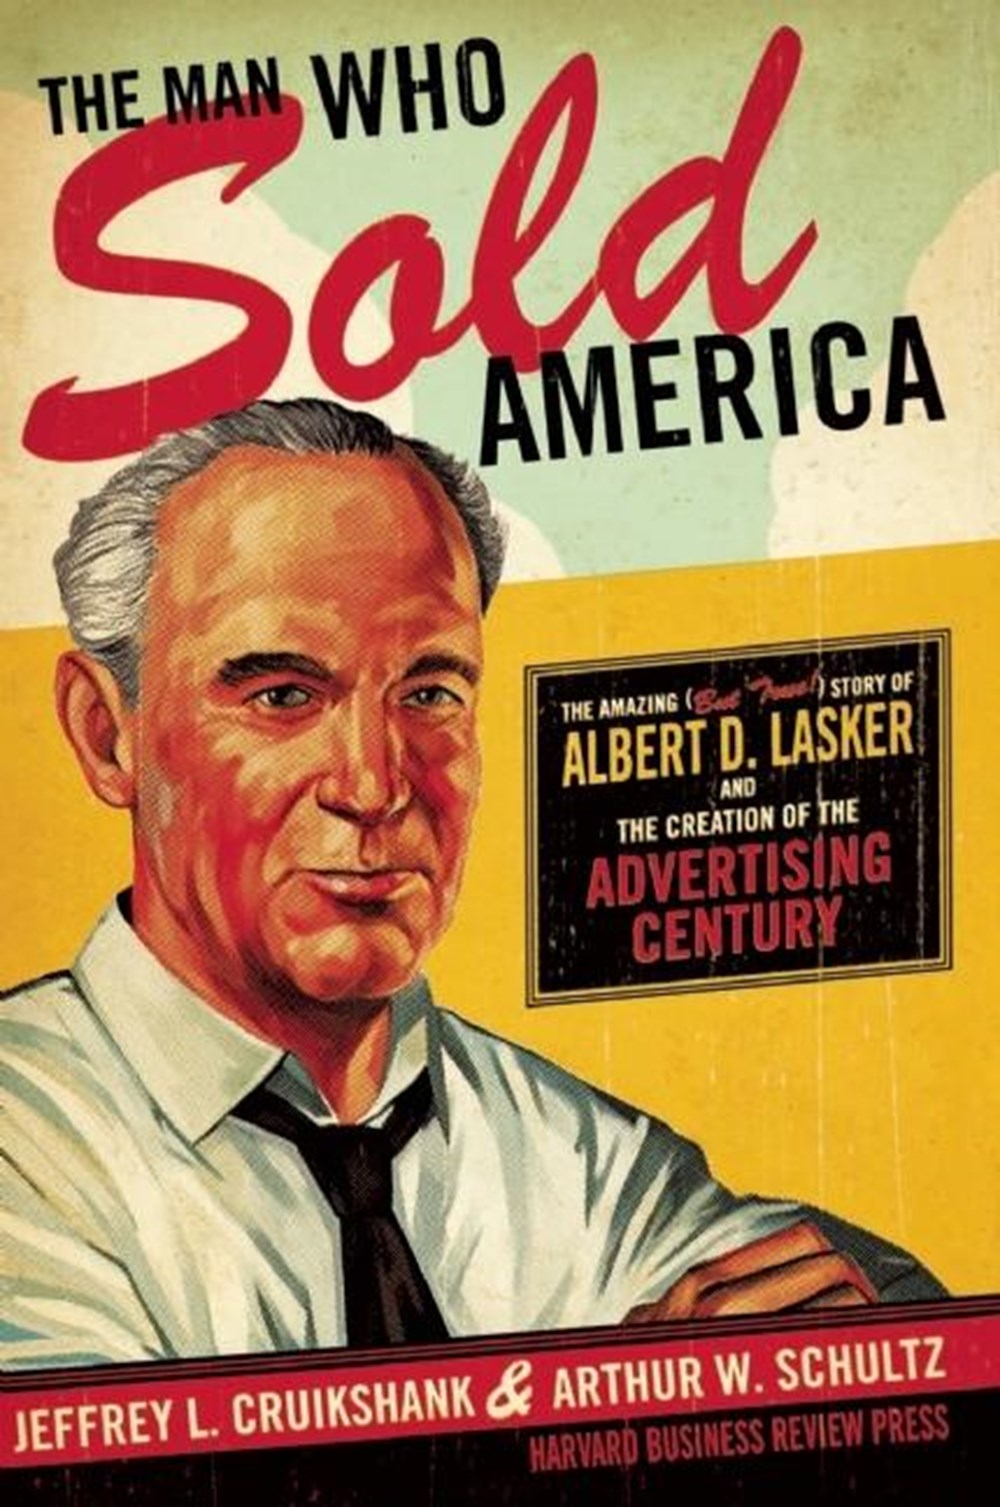 Man Who Sold America The Amazing (But True!) Story of Albert D. Lasker and the Creation of the Adver